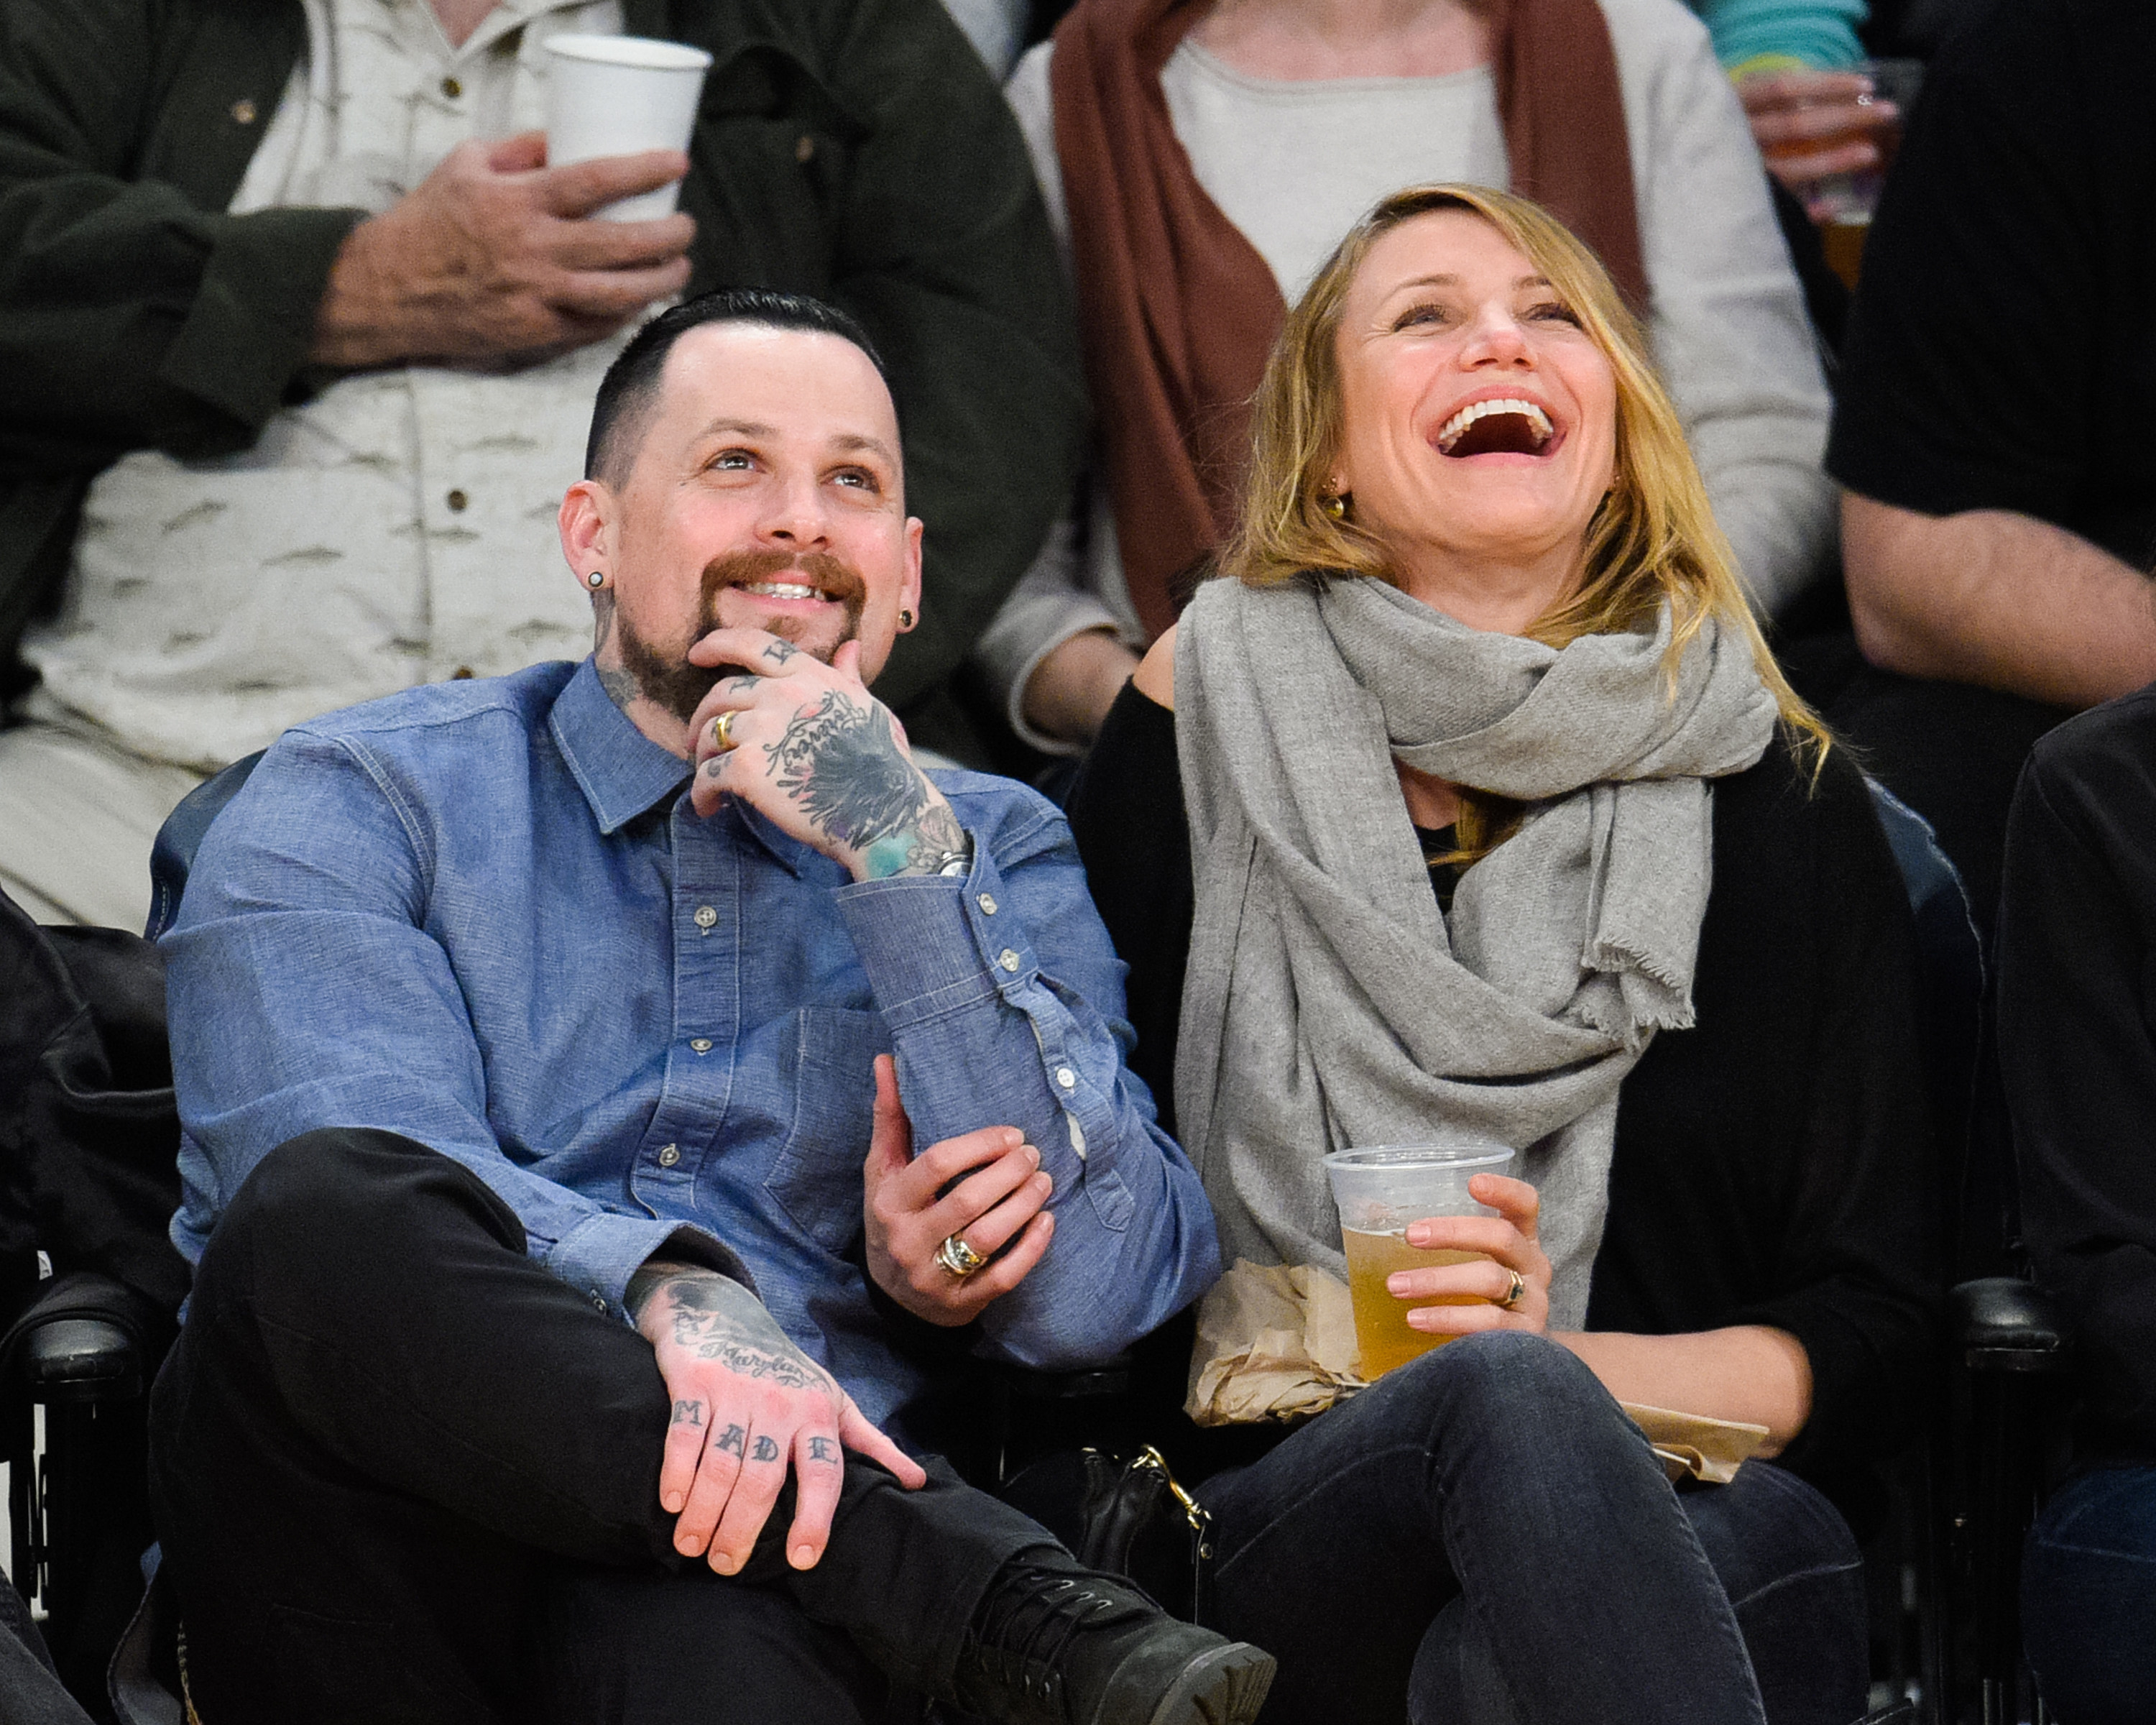 Benji Madden and Cameron Diaz at a basketball game in California. Photo: Getty Images